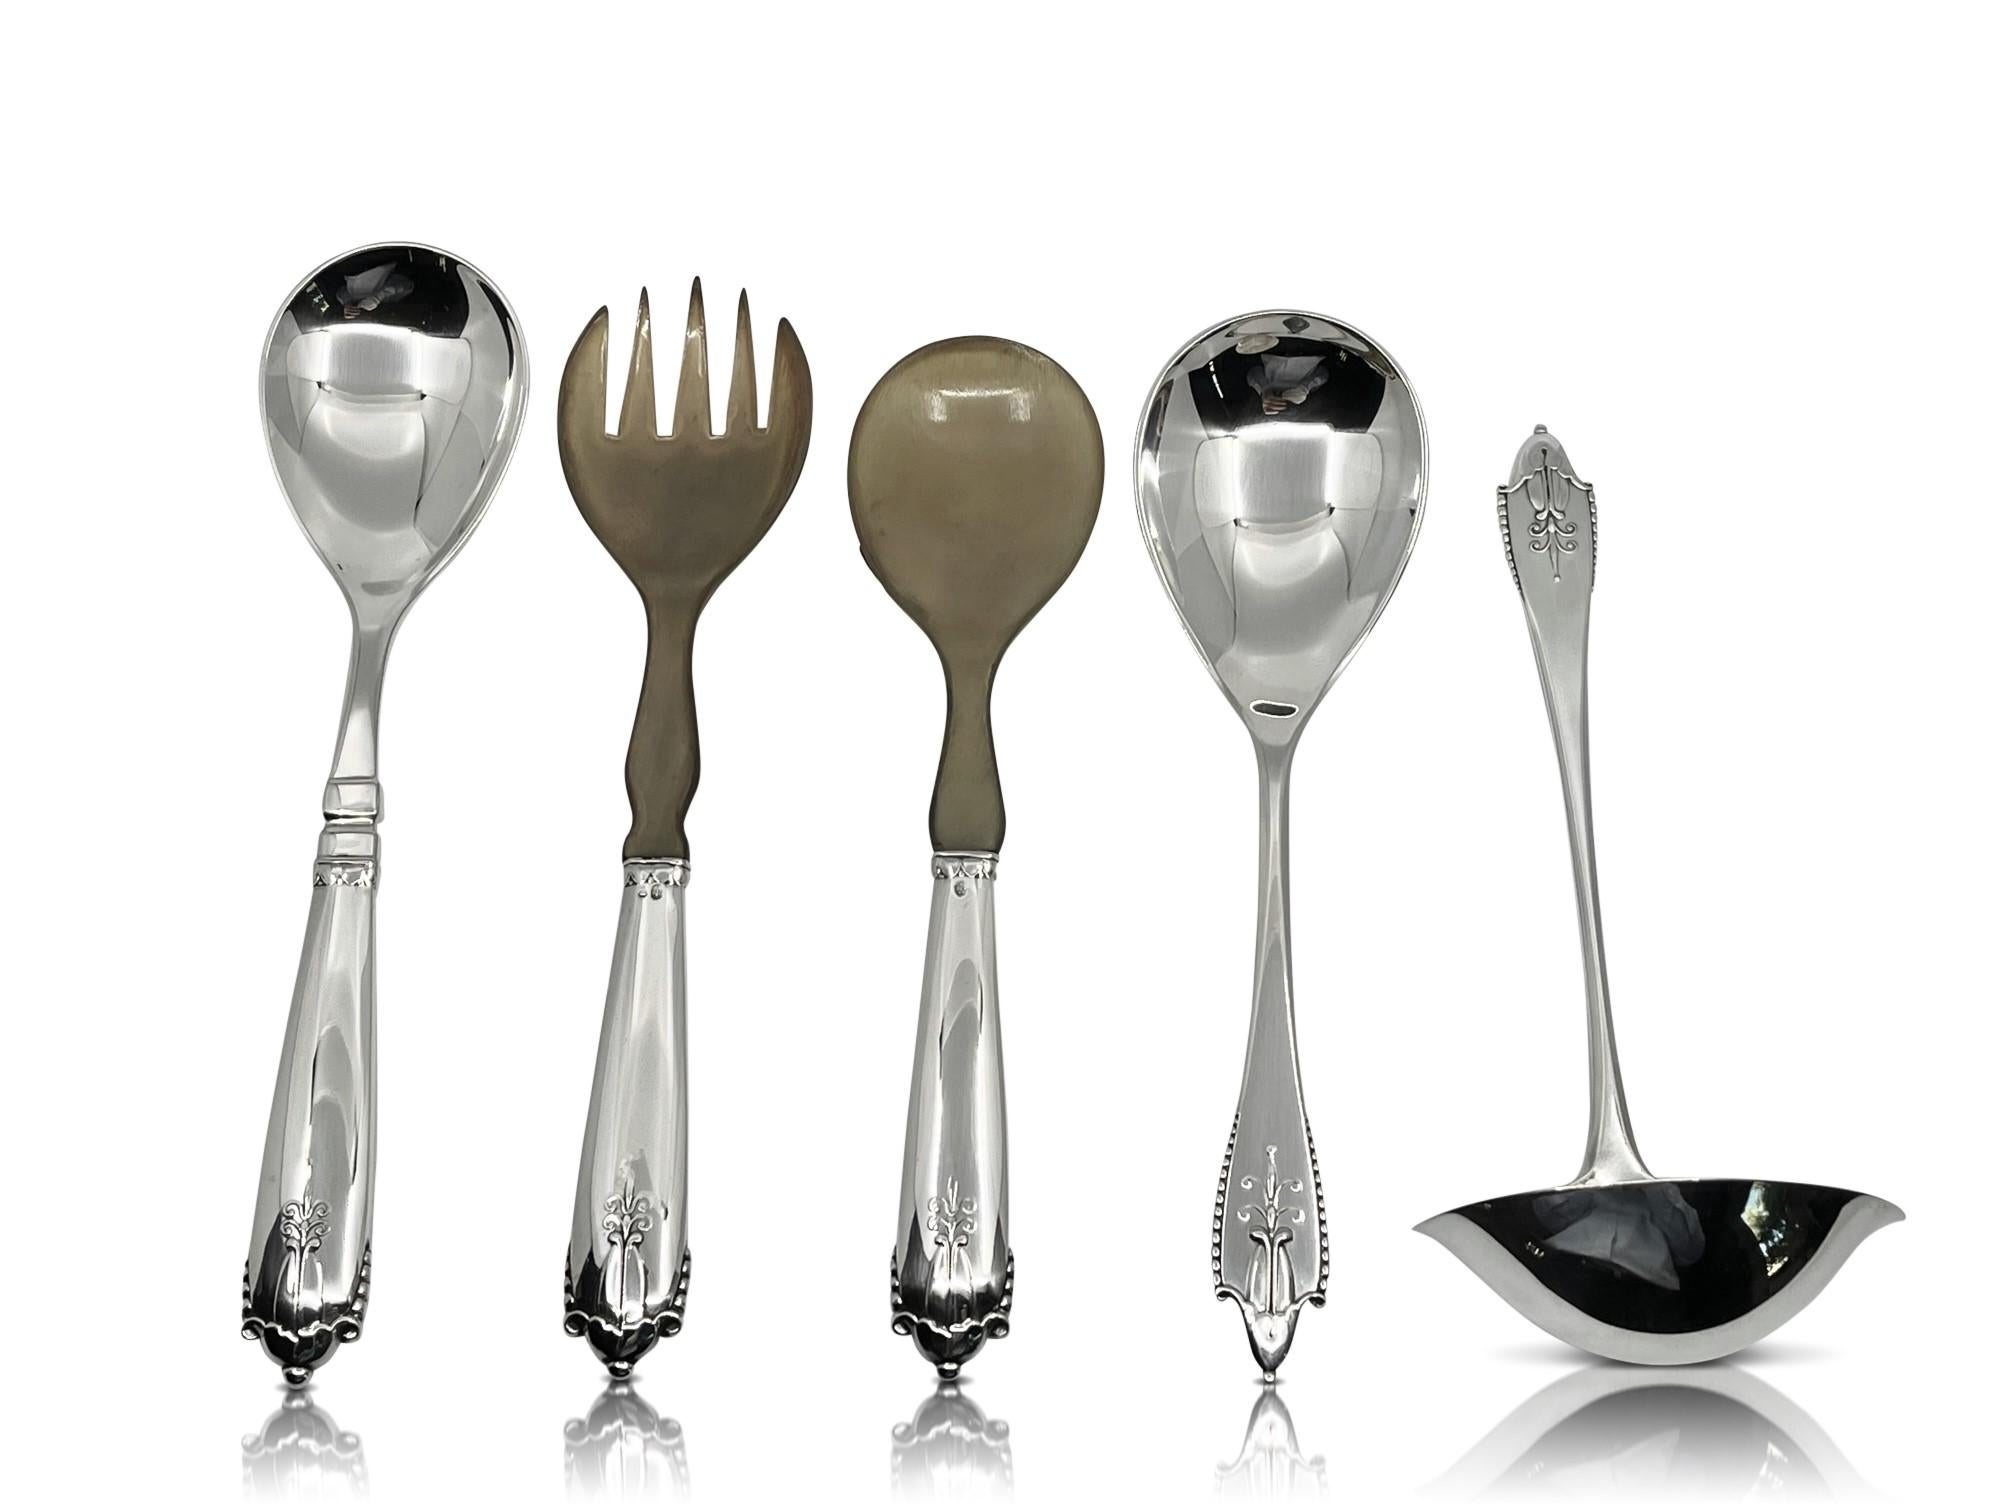 An early Georg Jensen silverware service in the Akkeleje pattern, design #77 by Georg Jensen from 1918. Its unusual to find a large complete set in this pattern, it is more unusual that nearly all the pieces were bought and are from the same period,